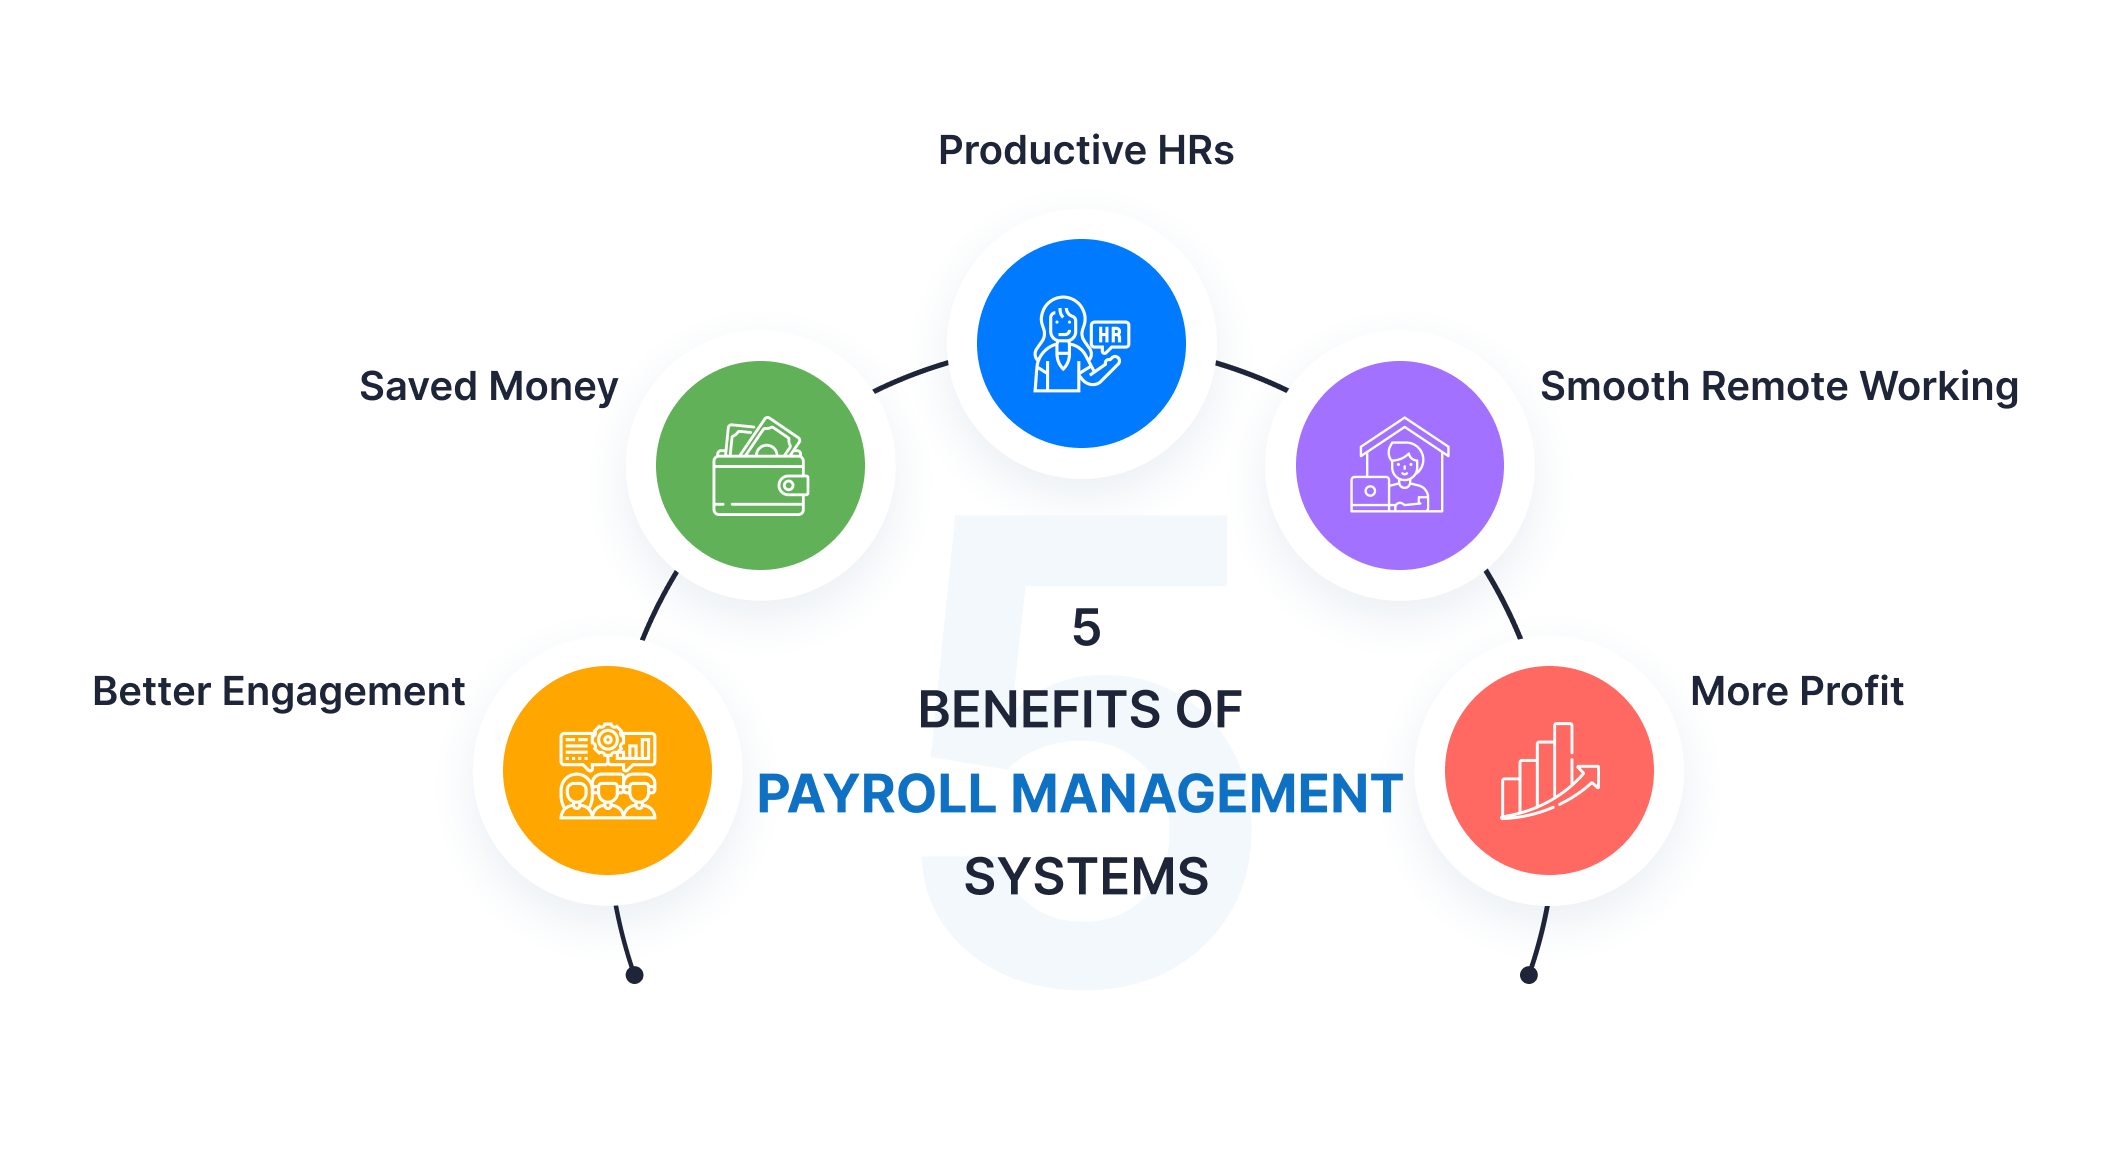 Benefits of Payroll Management Systems